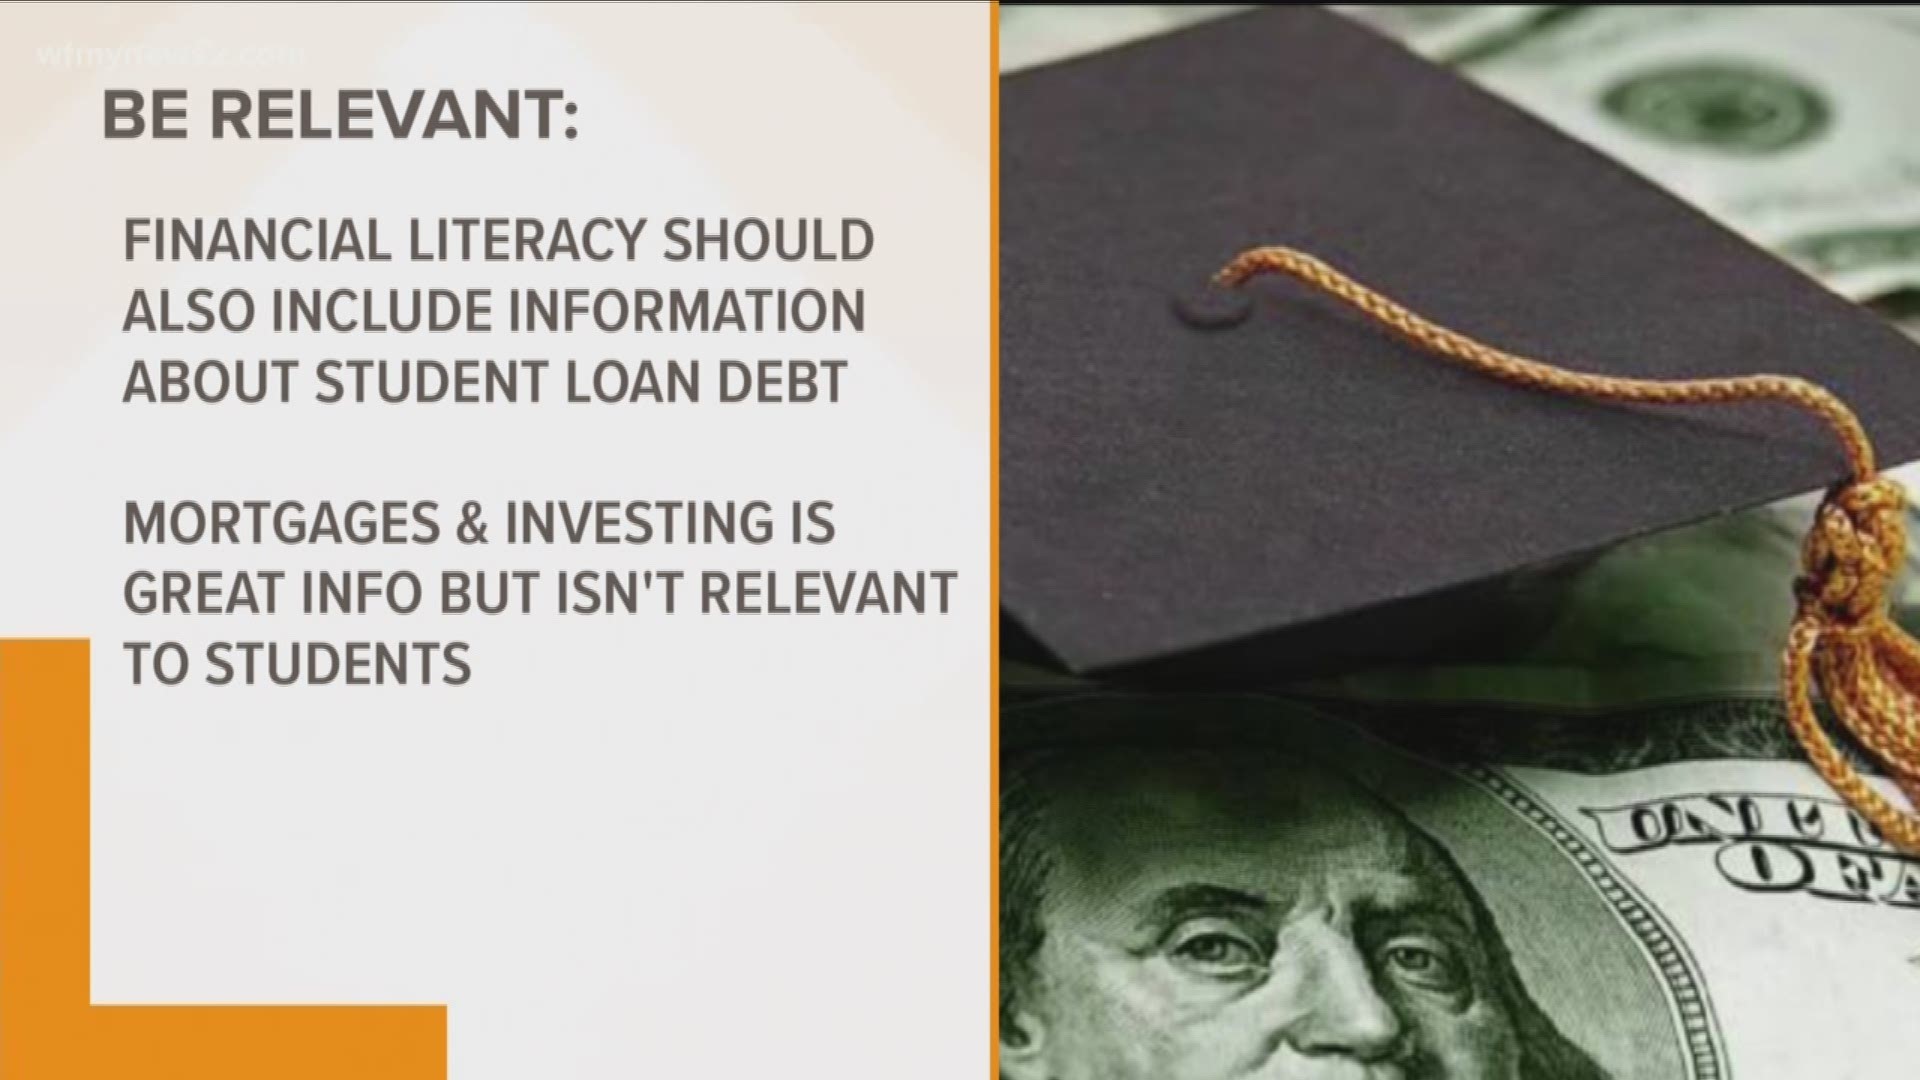 Money expert Ja'Net Adams examines how North Carolina can ensure financial literacy works for students.